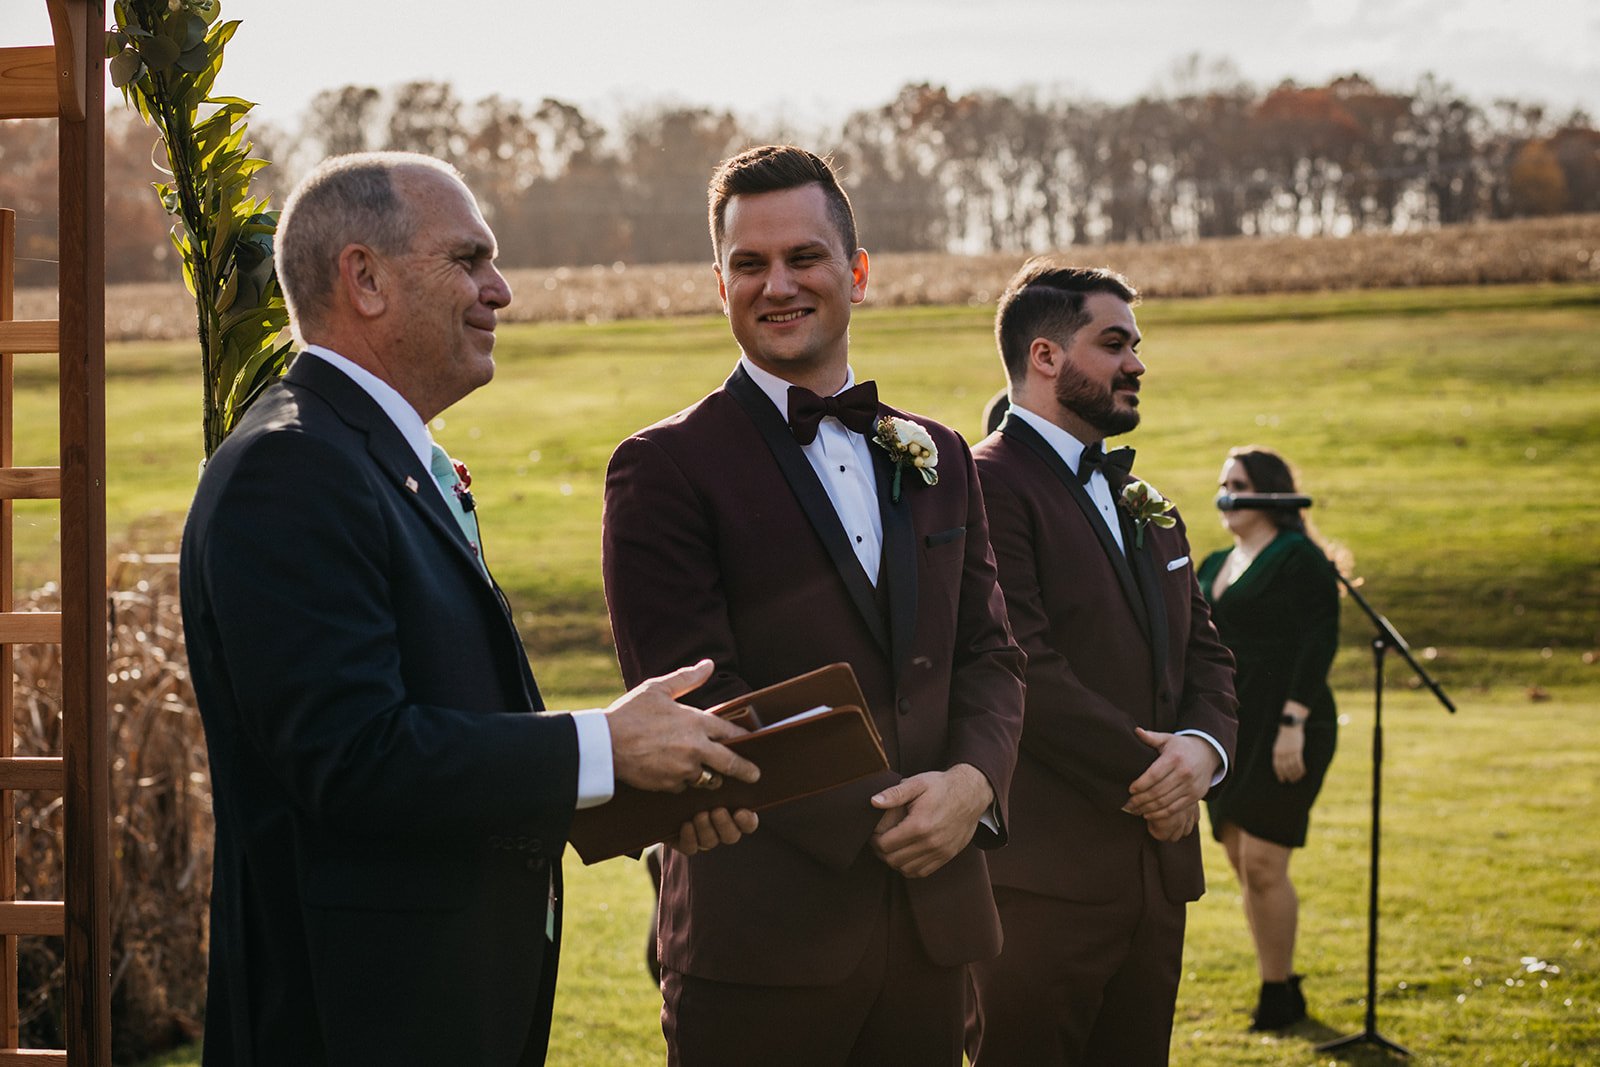 A groom smiles after seeing his wife at the wedding ceremony.